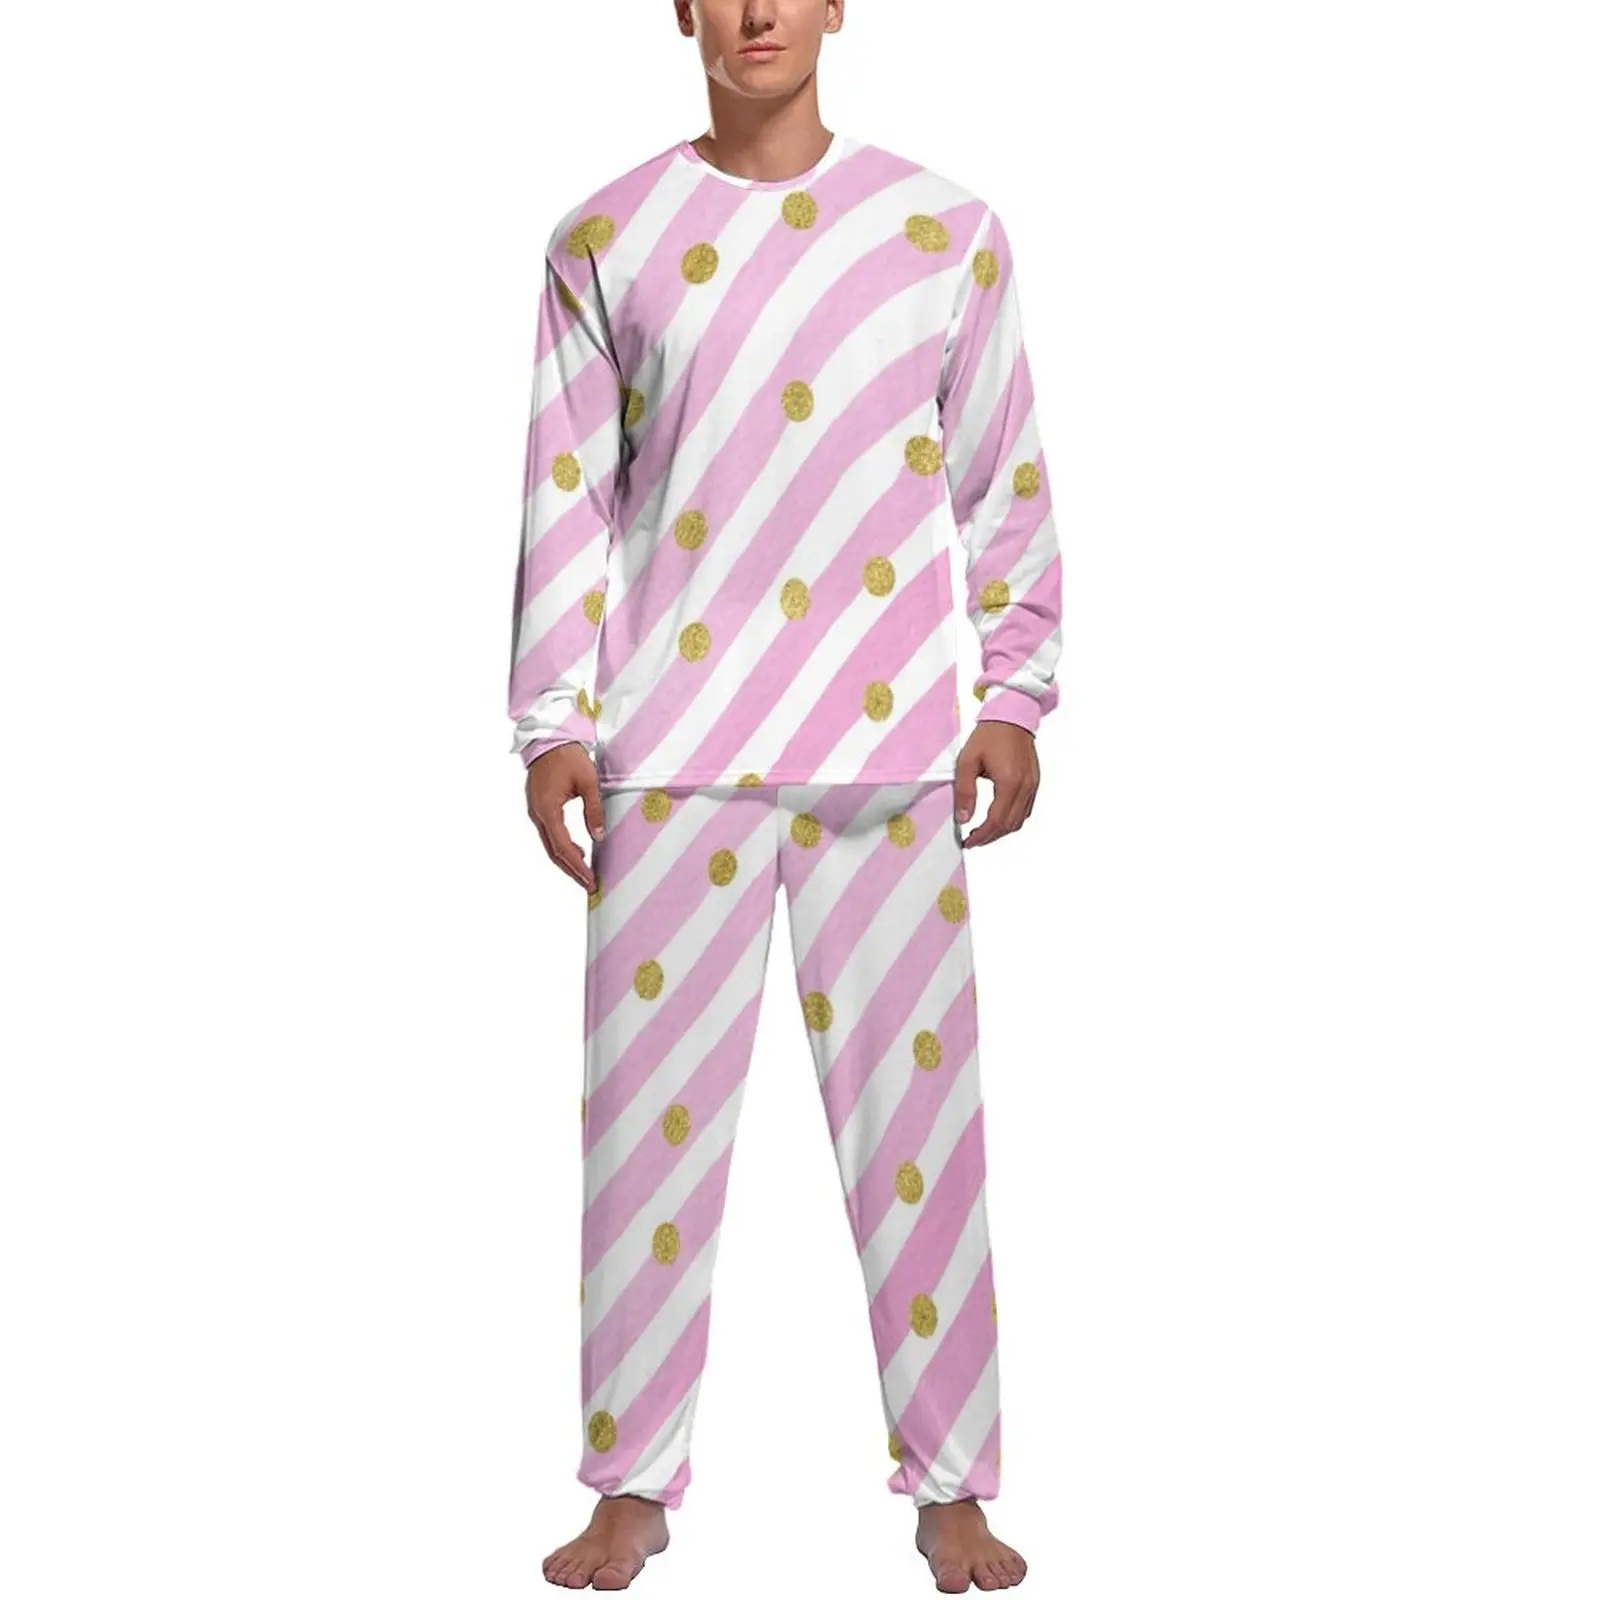 

Glitter Dots And Stripes Pajamas Autumn Pink Geometric Bedroom Home Suit Men 2 Pieces Custom Long Sleeve Trendy Pajama Sets